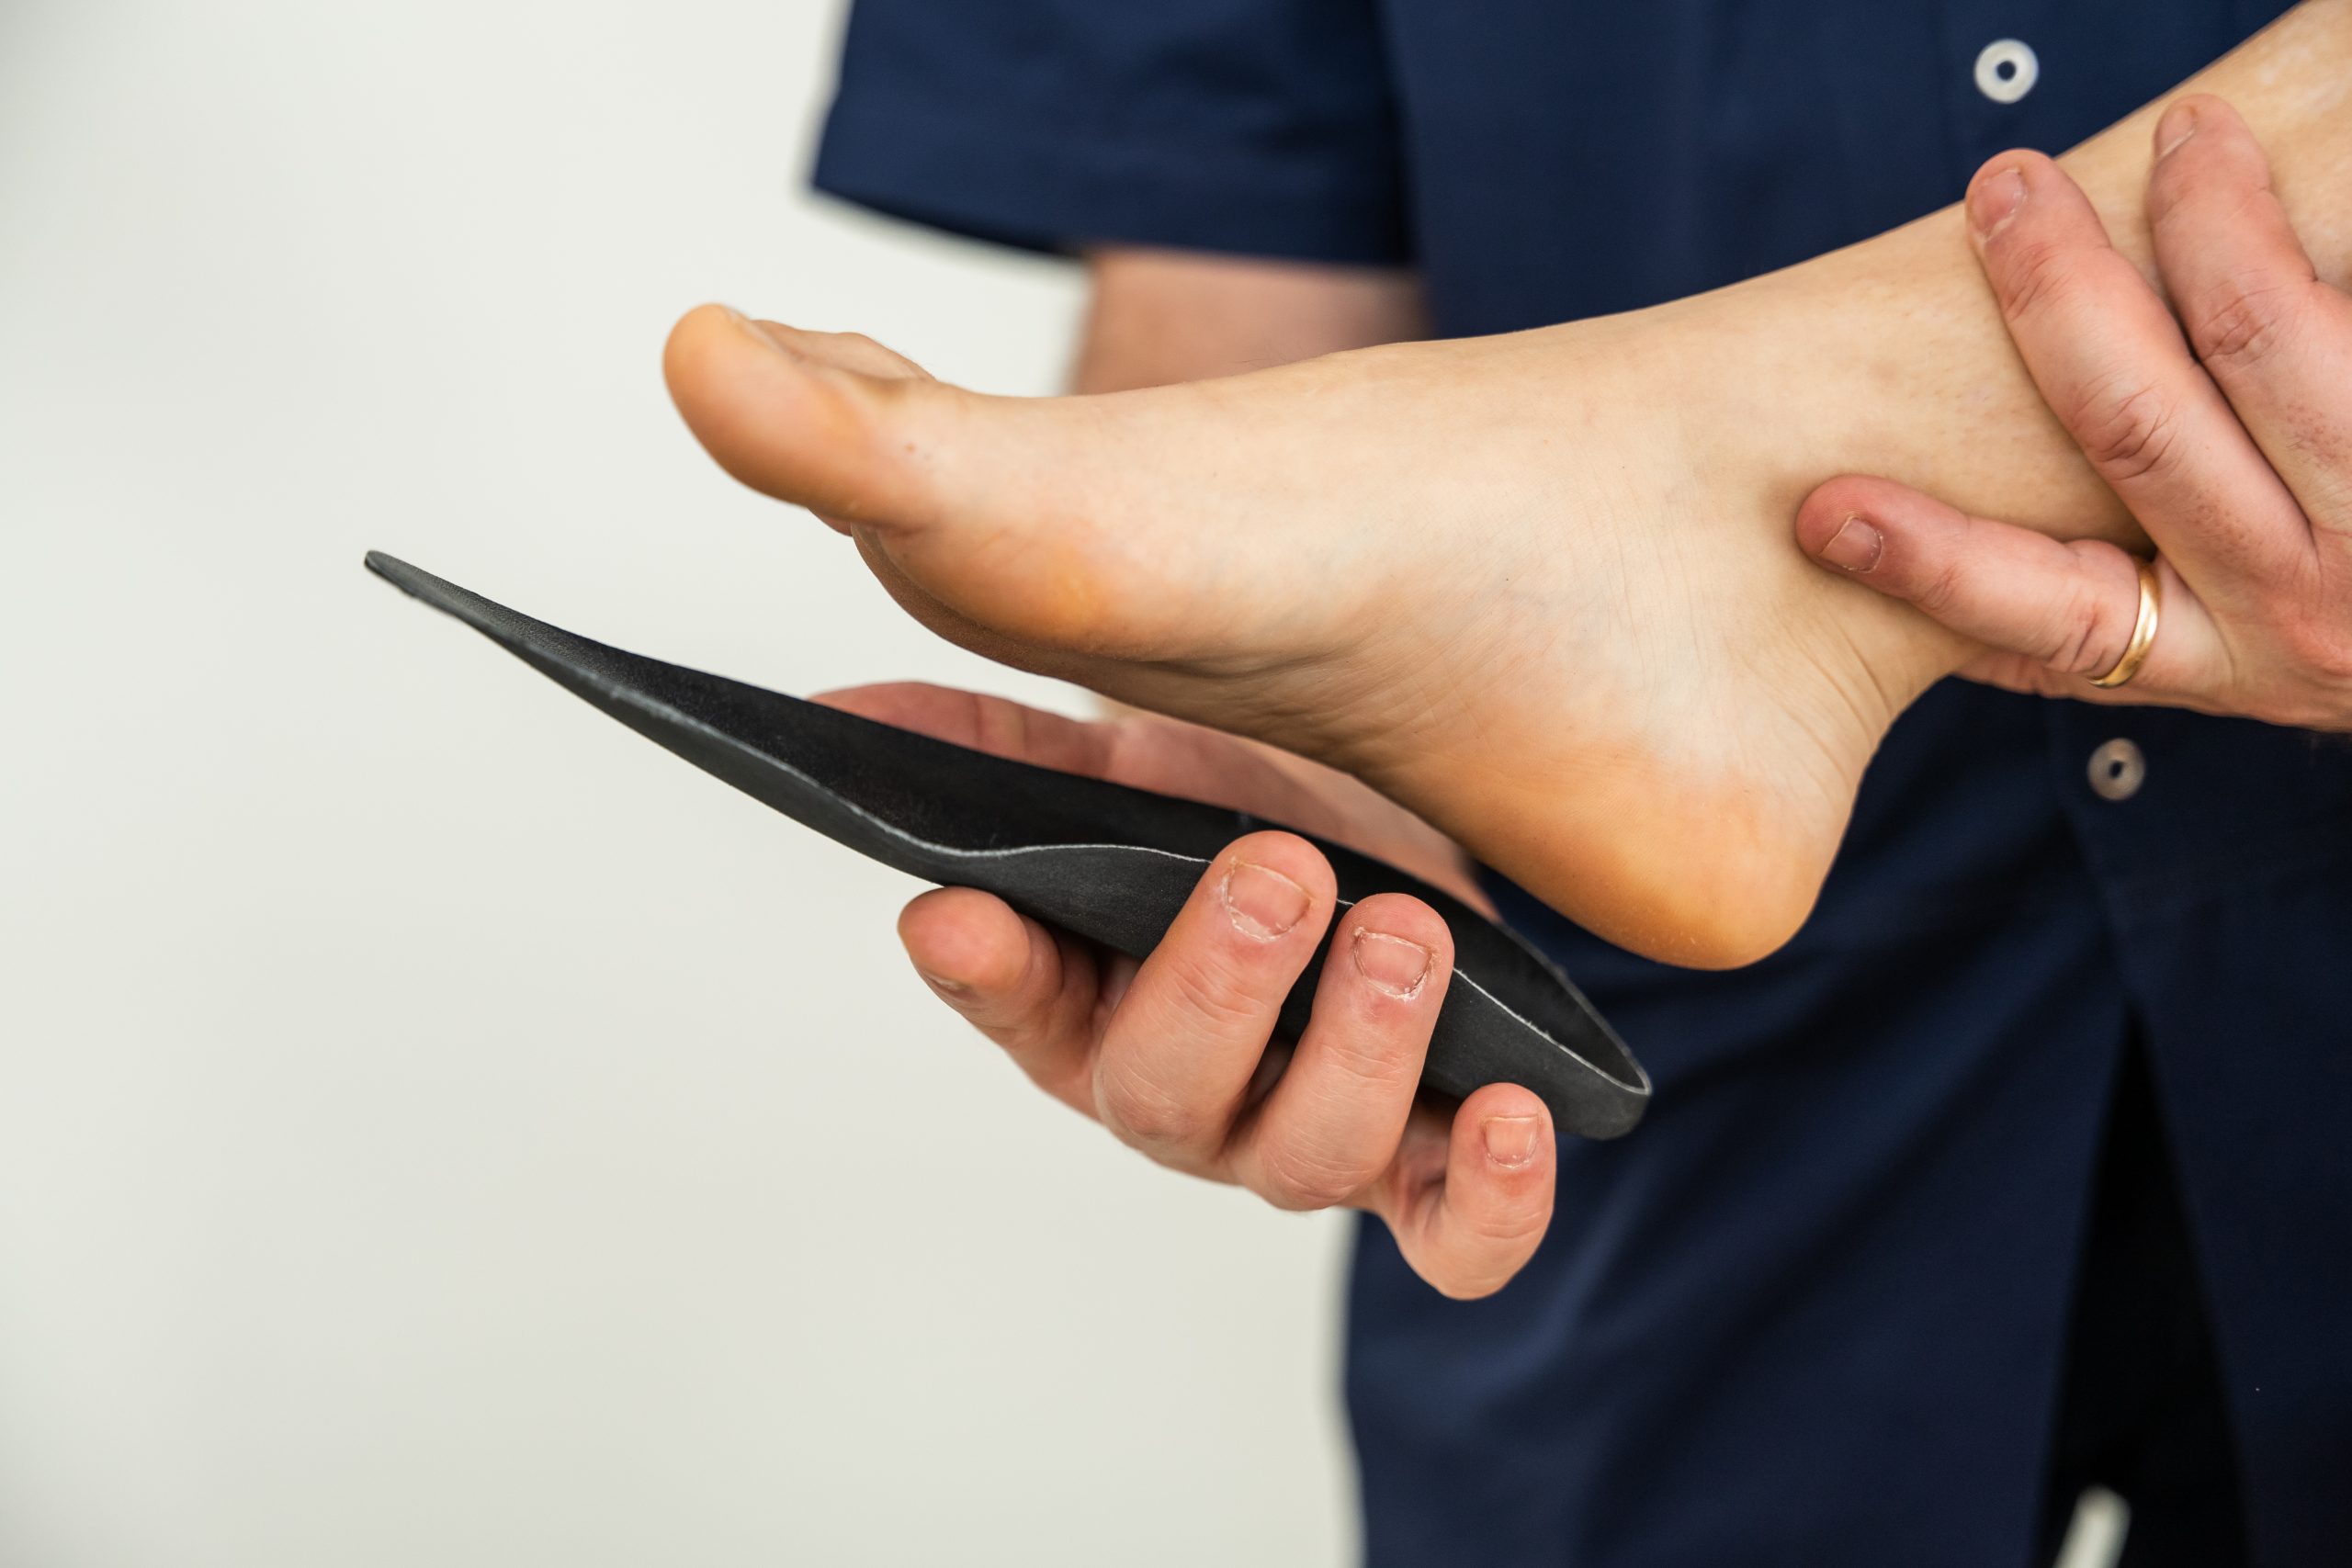 Freiberg’s disease: should you wear foot orthoses?